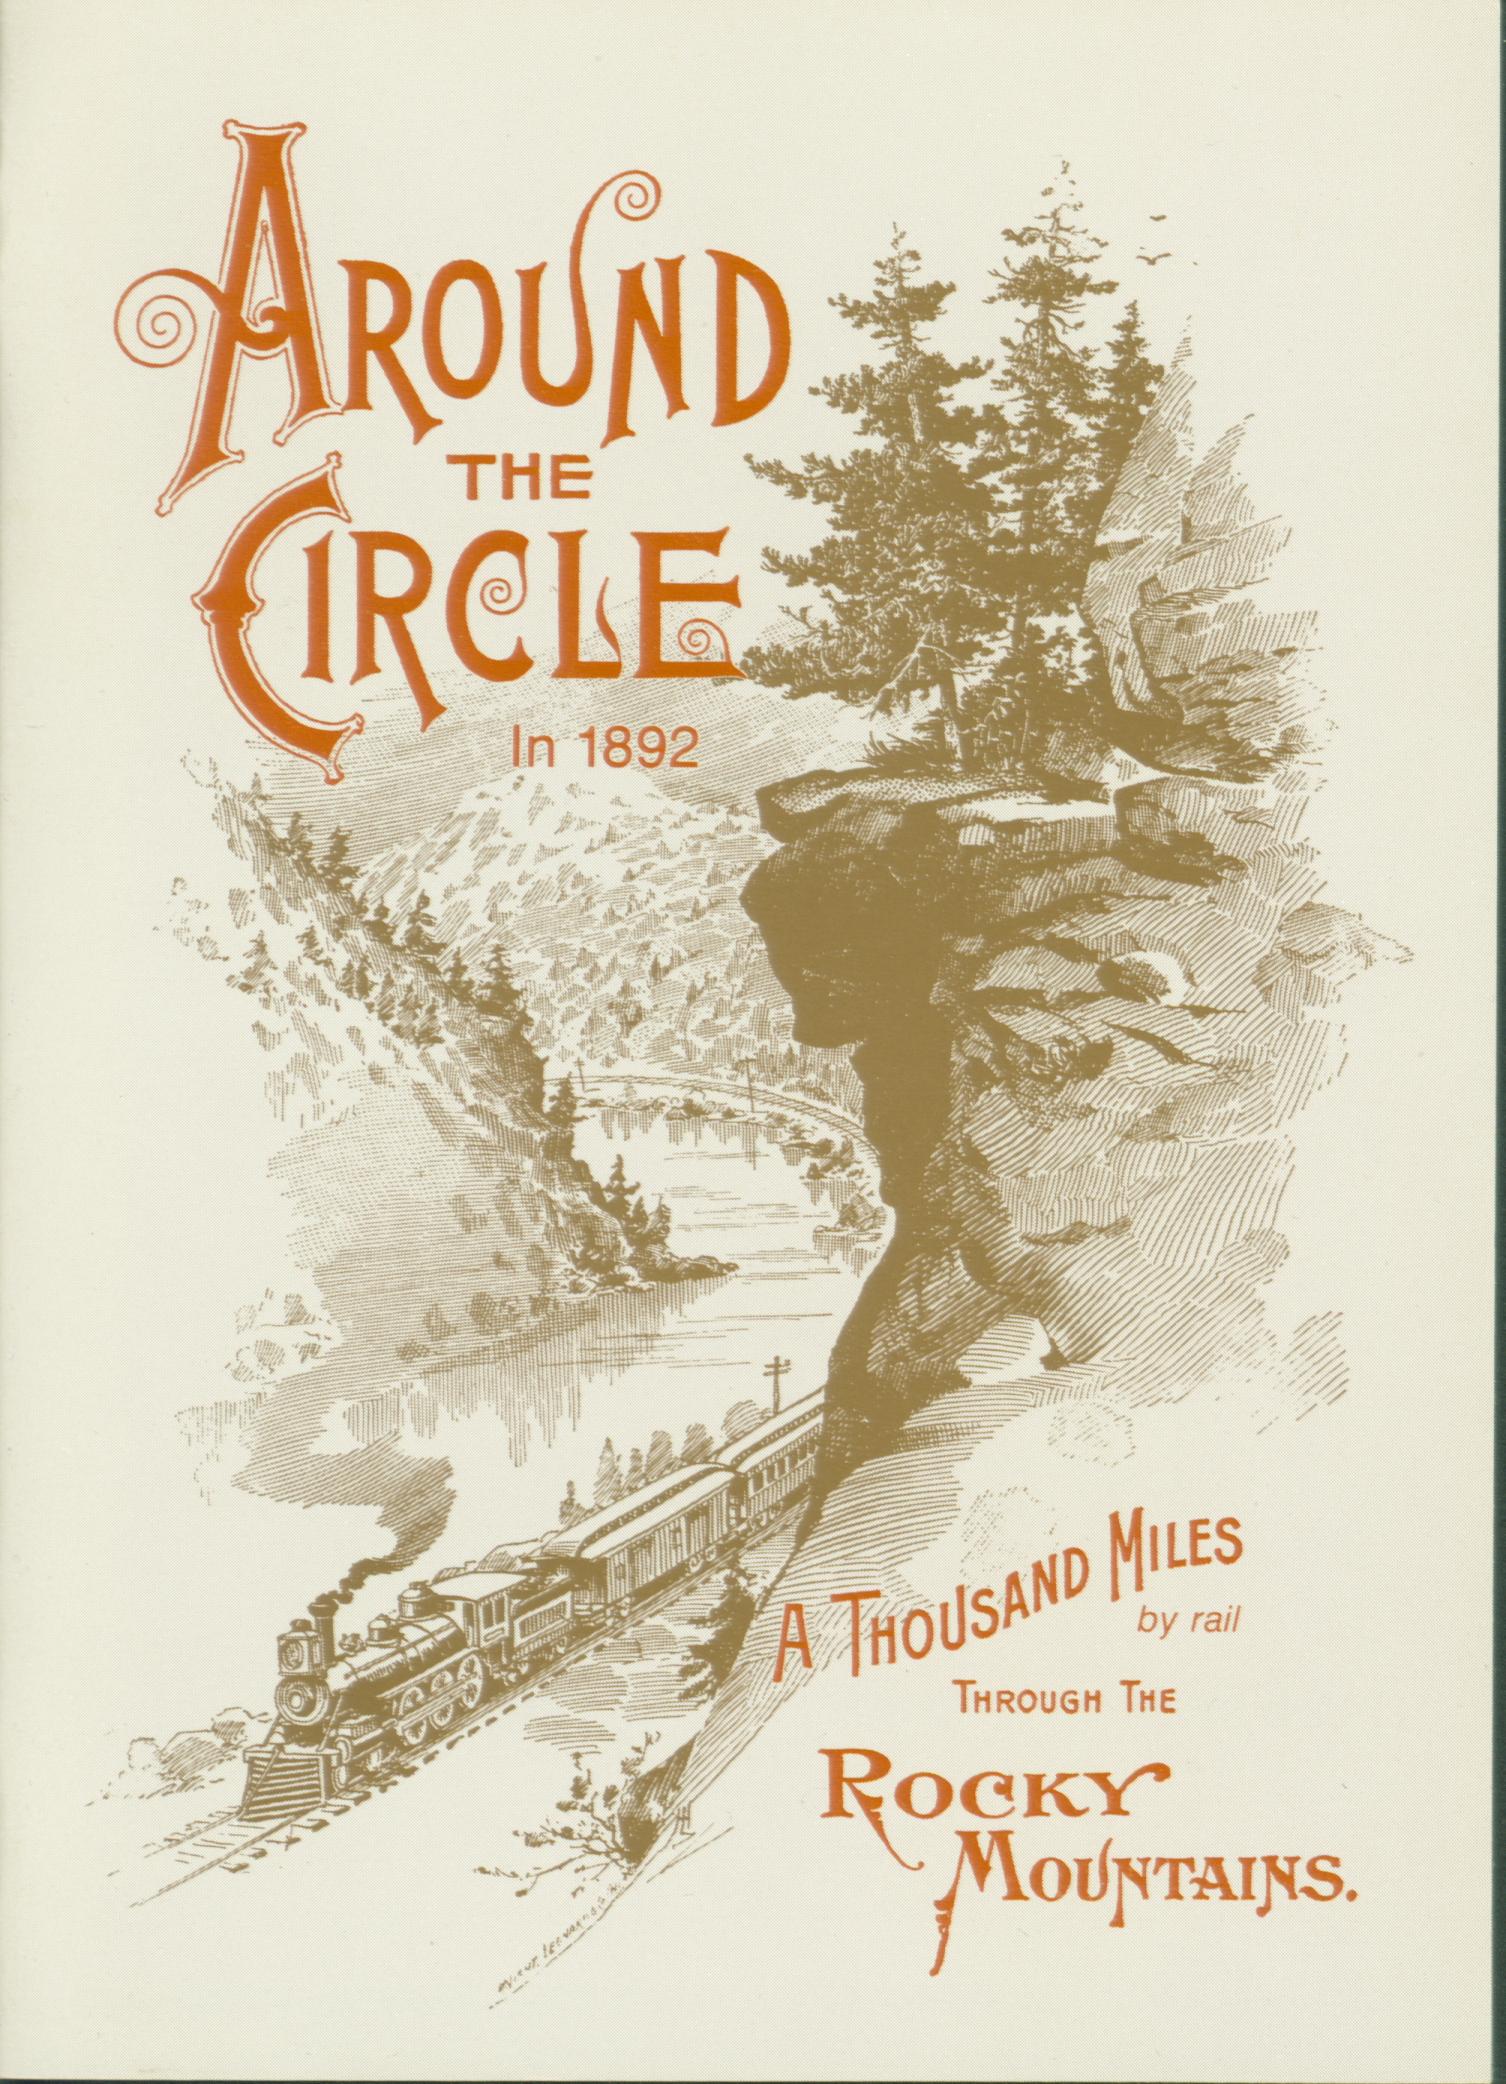 Around the Circle in 1892--a Thousand Miles by Rail.